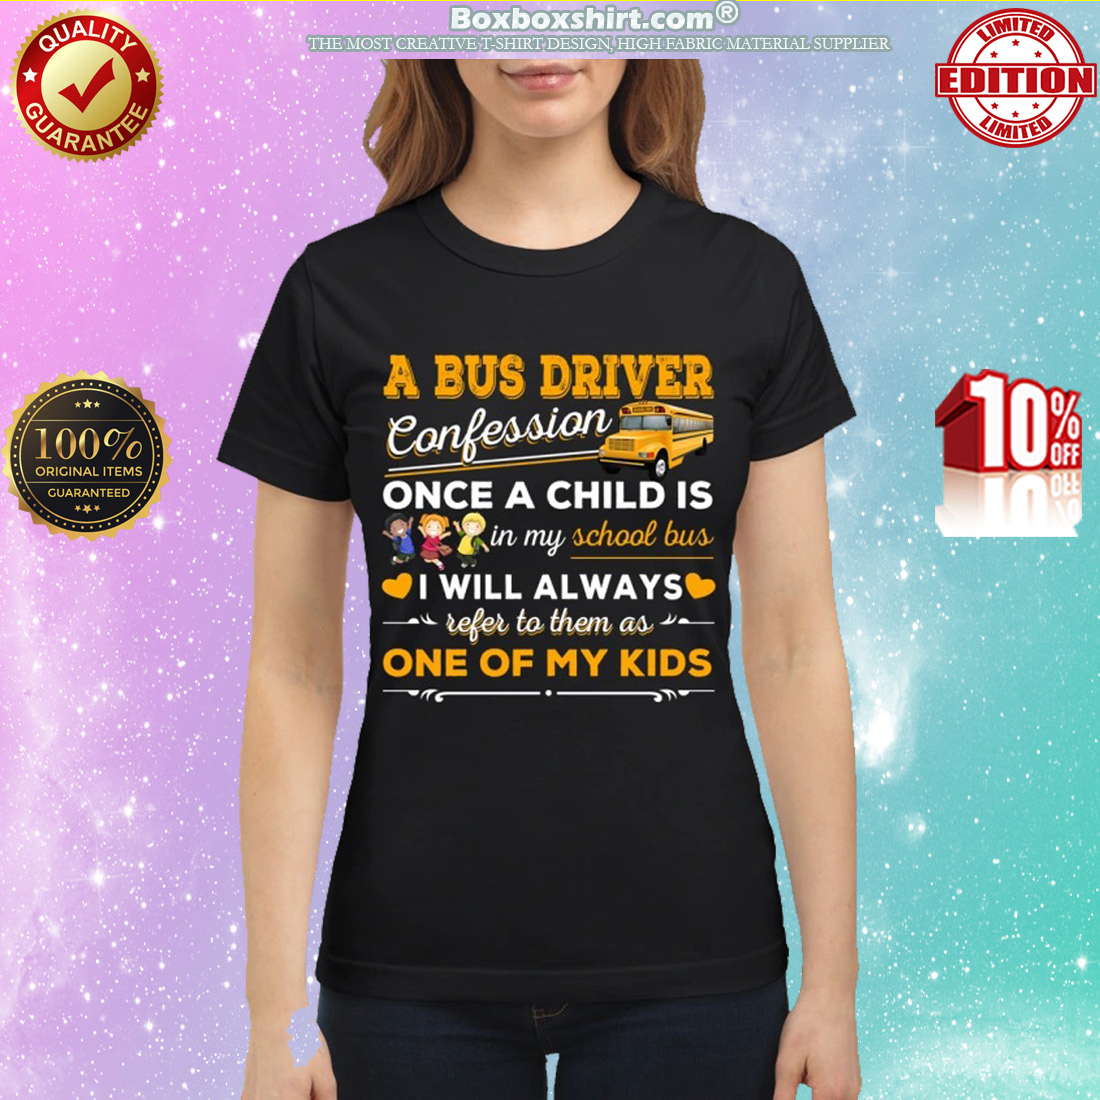 A bus driver confession once a child is in my school bus classic shirt